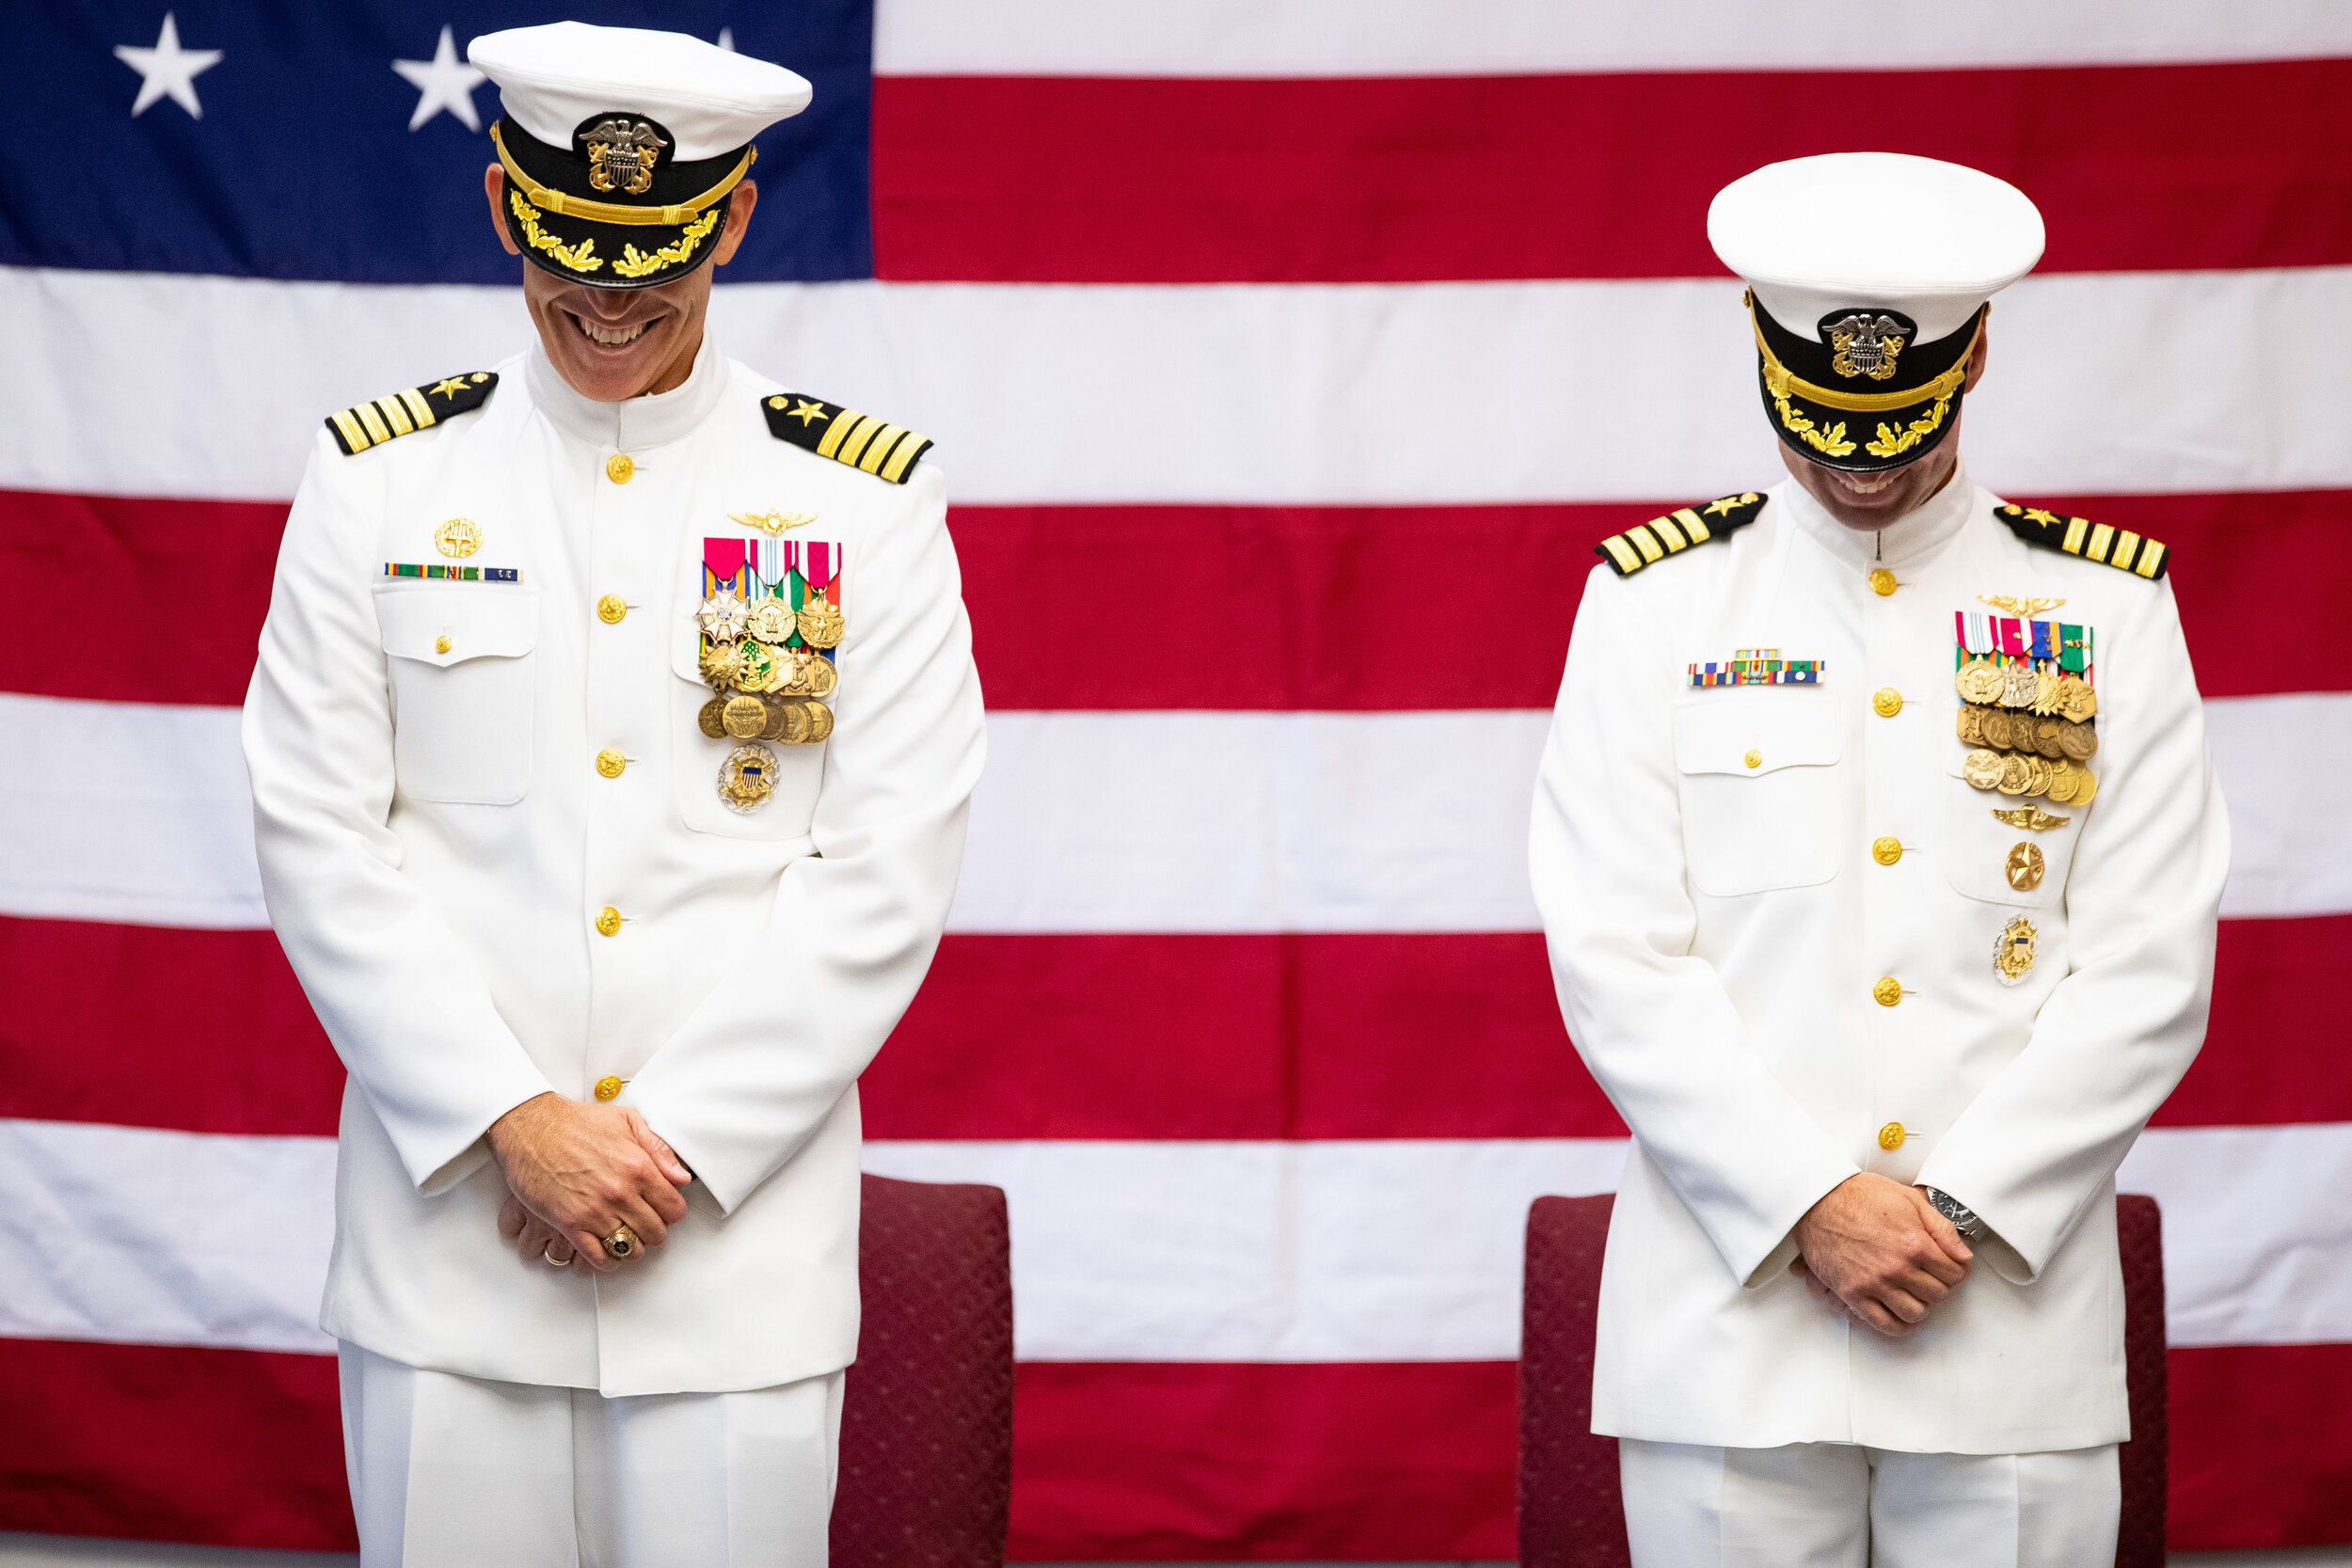  Out going Captain Philip Brock, left and incoming Captain Christopher Janson smile during the invocation of the Naval Air Station Corpus Christi change of command and retirement ceremony on Wednesday, July 31, 2019. 